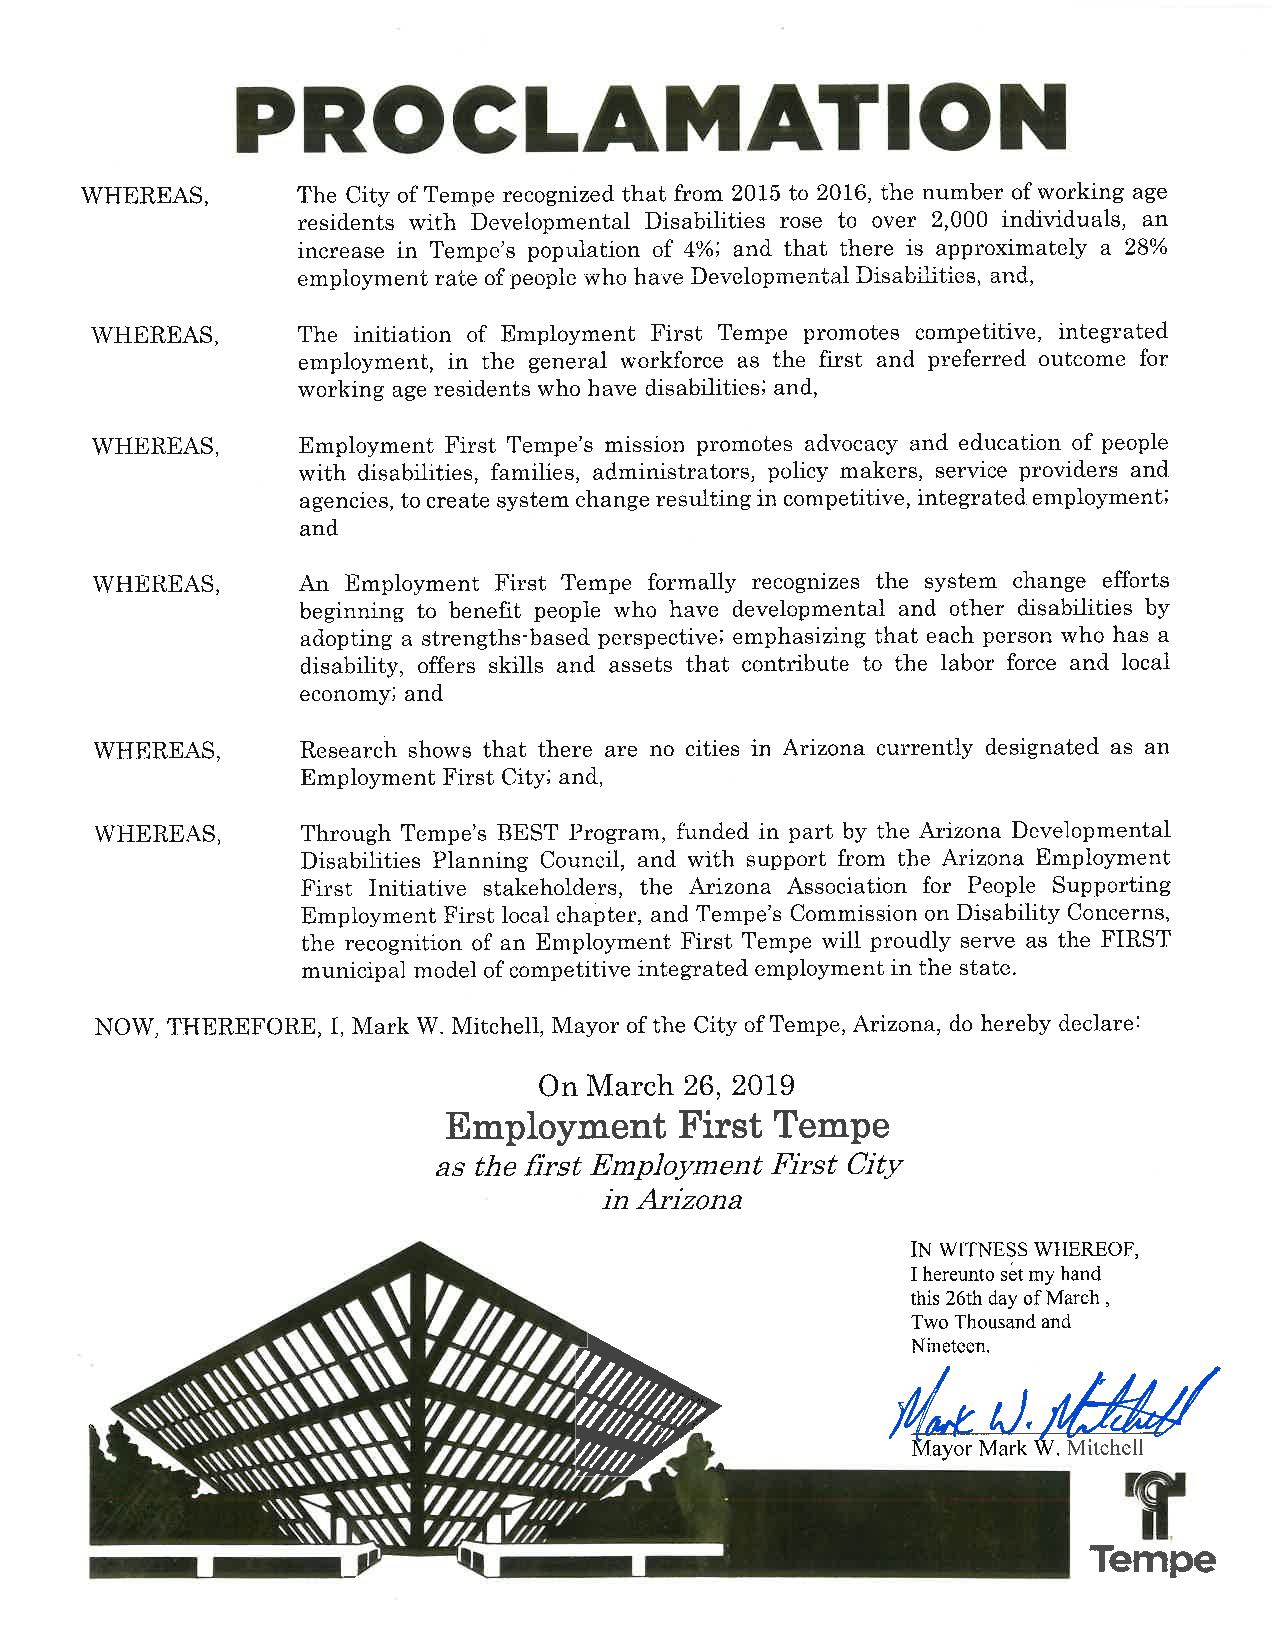 Image of Tempe Proclamation Text